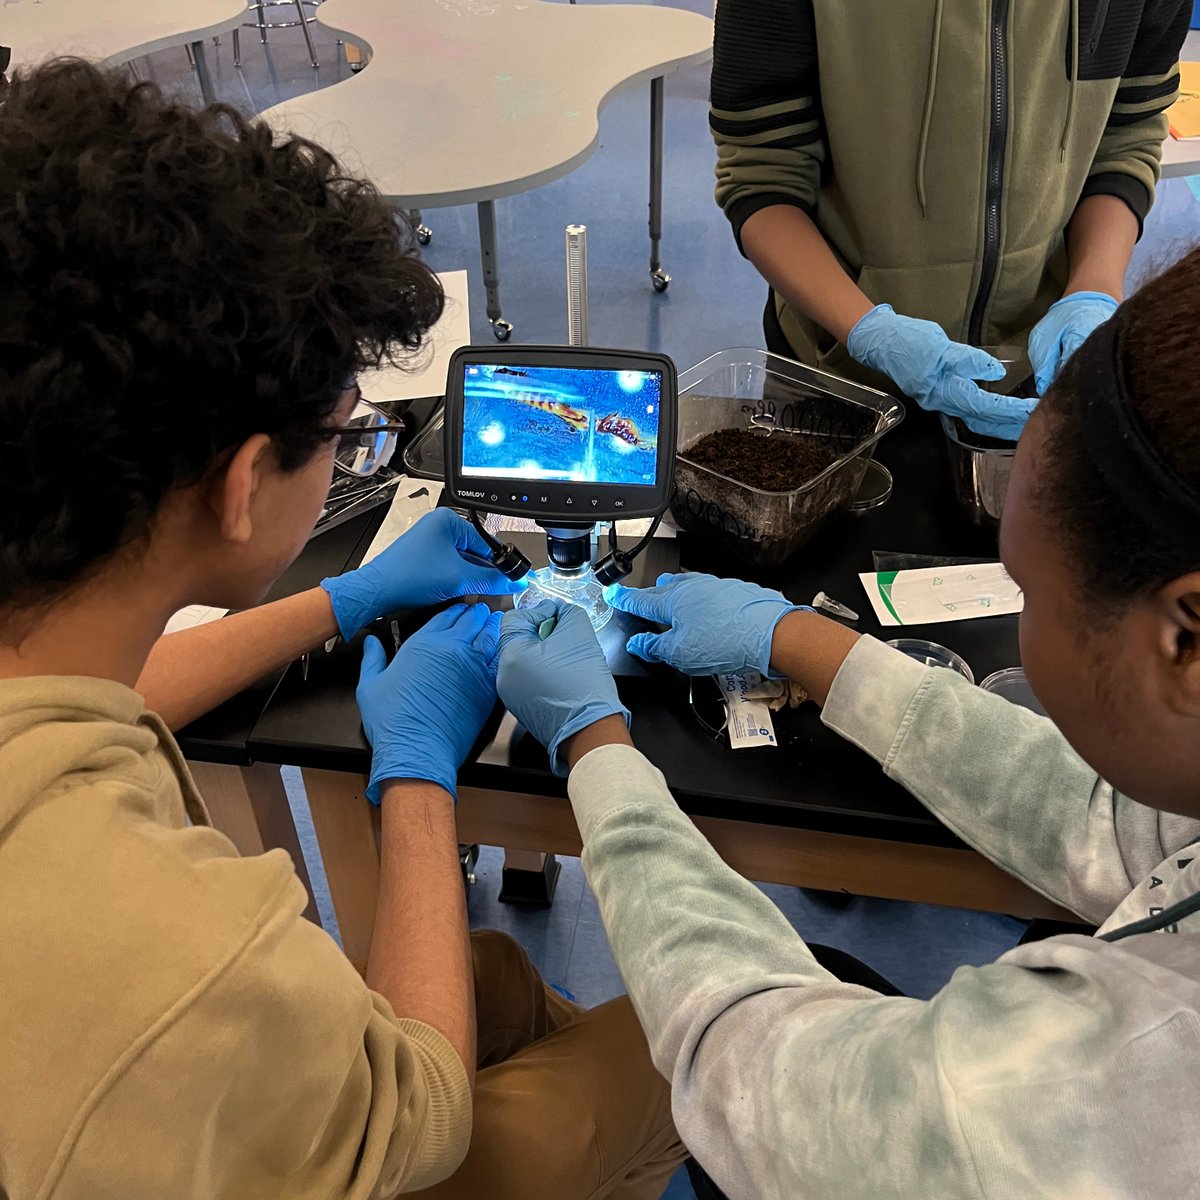 Today was Garrett Morgan Wednesday! Here's a shot of students dissecting an earthworm in our 'Caffeine Critters' group! These students are interesting in learning more about the effect of caffeine on behavior and the brain.